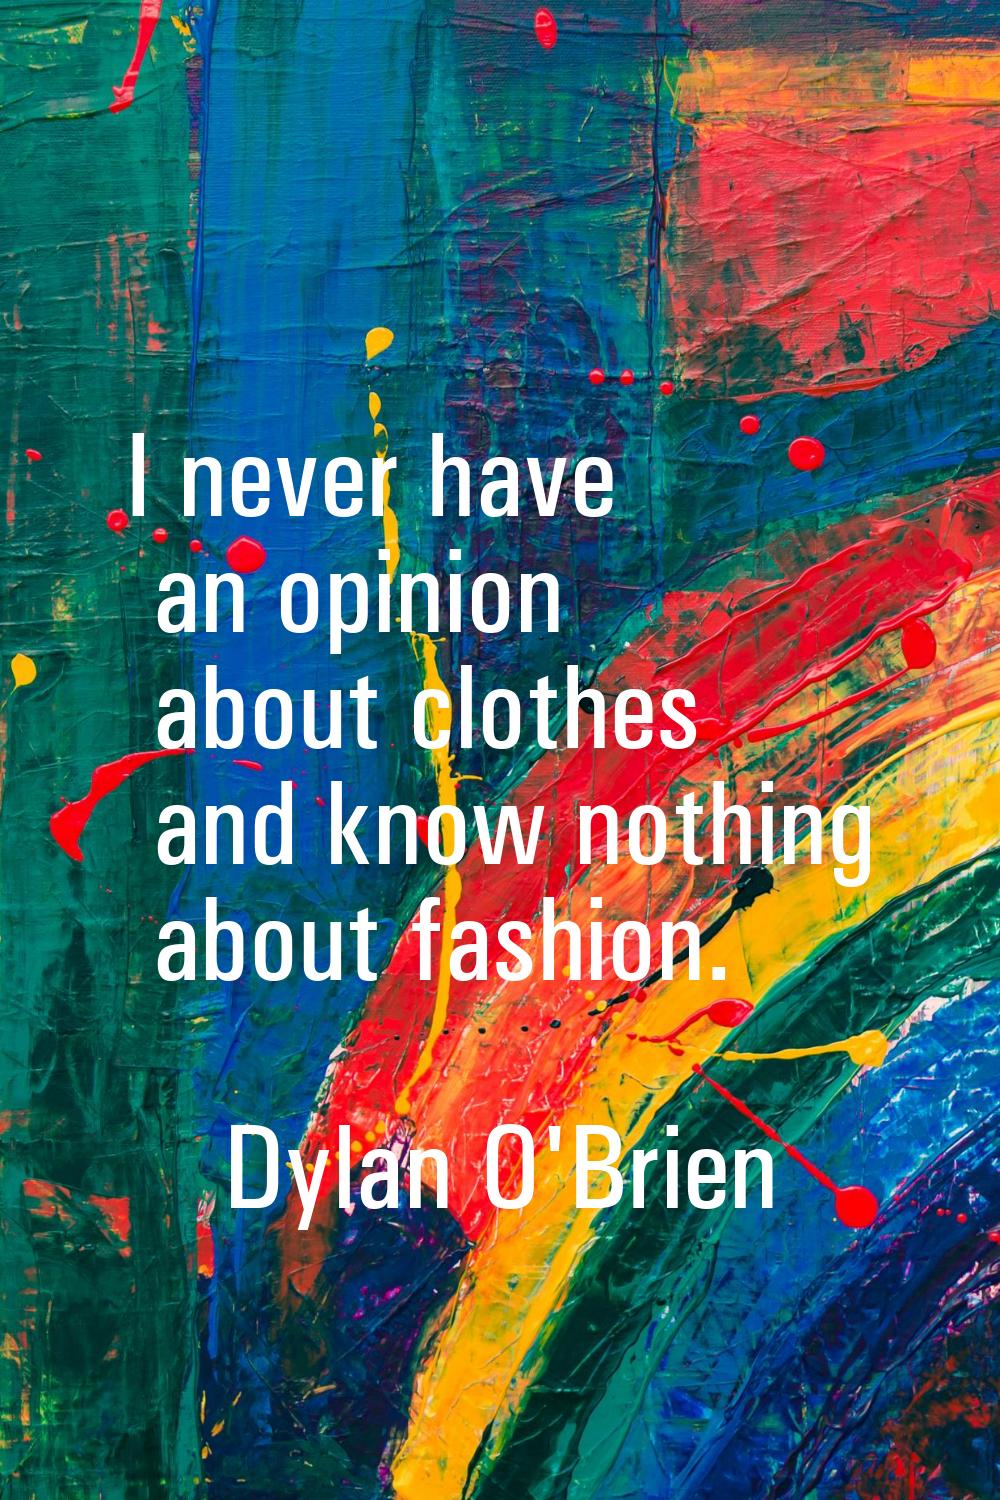 I never have an opinion about clothes and know nothing about fashion.